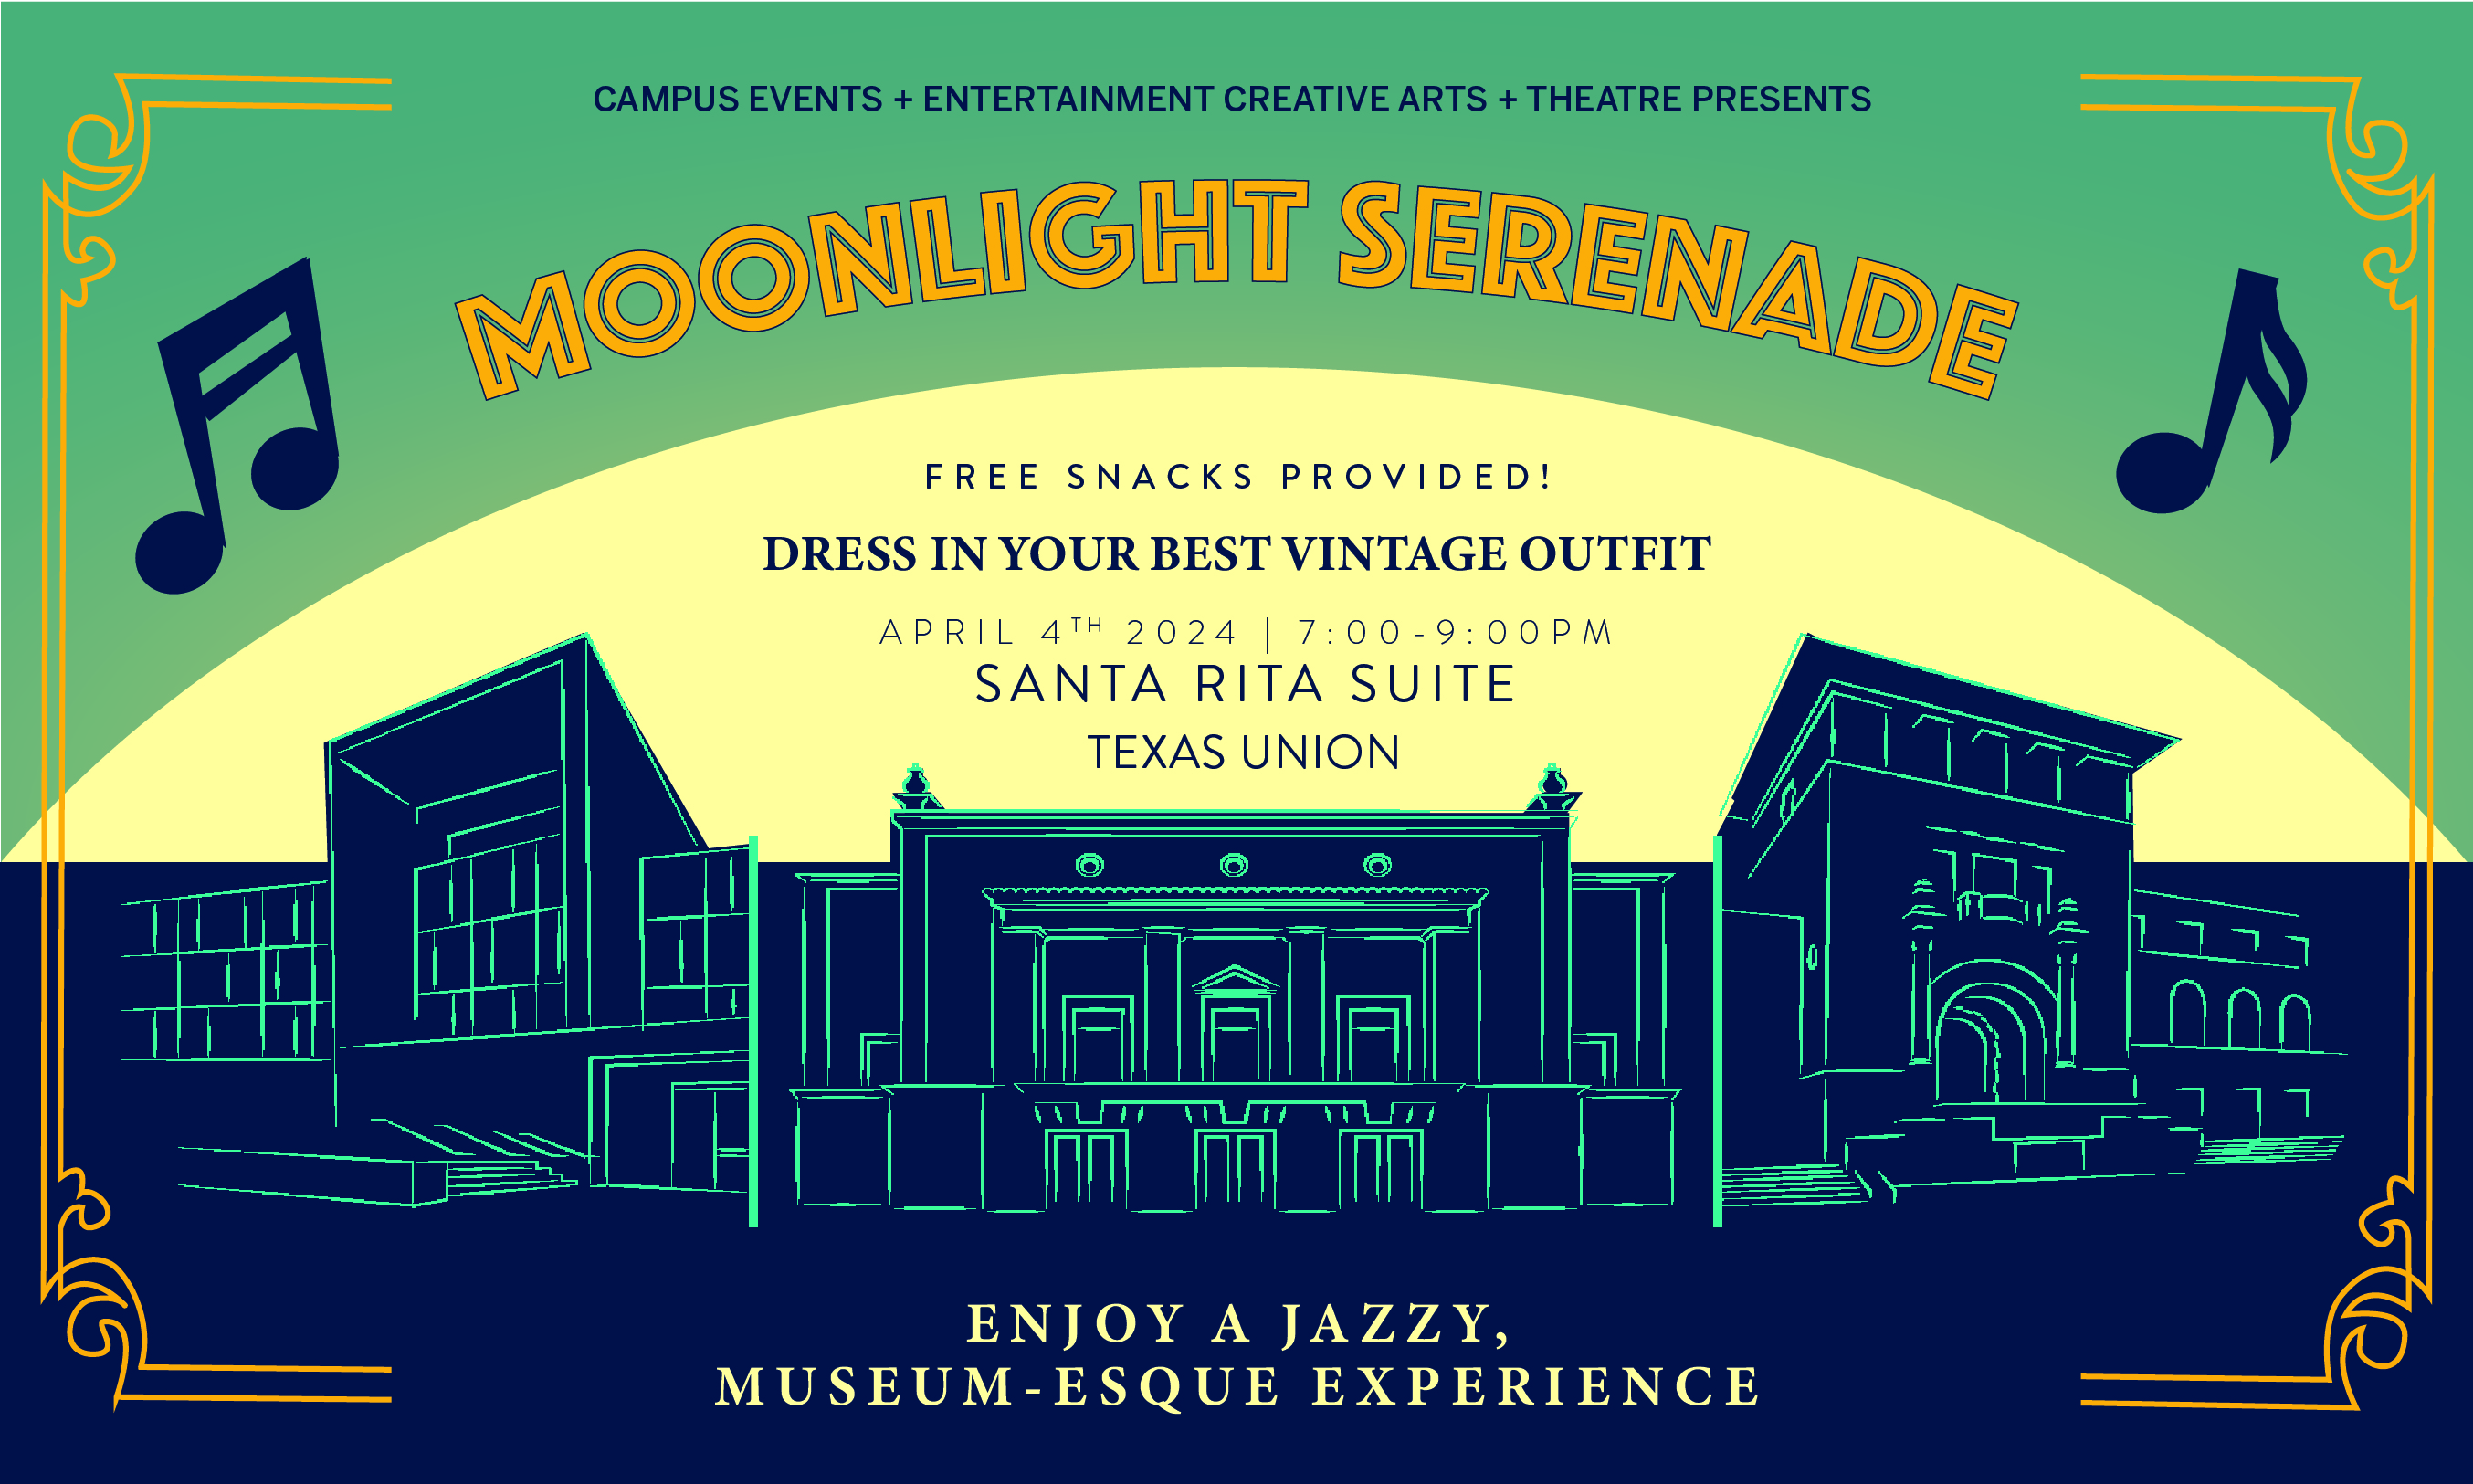 A teal background with a huge building in the forefront with a moon peeking from behind. In yellow letters it says Moonlight Serenade. Underneath in black text that says Free Snacks Provided! Dress in your best vintage outfit. April 4th 2024, 7:00-9:00 pm Santa Rita Suite Texas Union. and under the bilding it says Enjoy a Jazzy Museum-Esque Experience